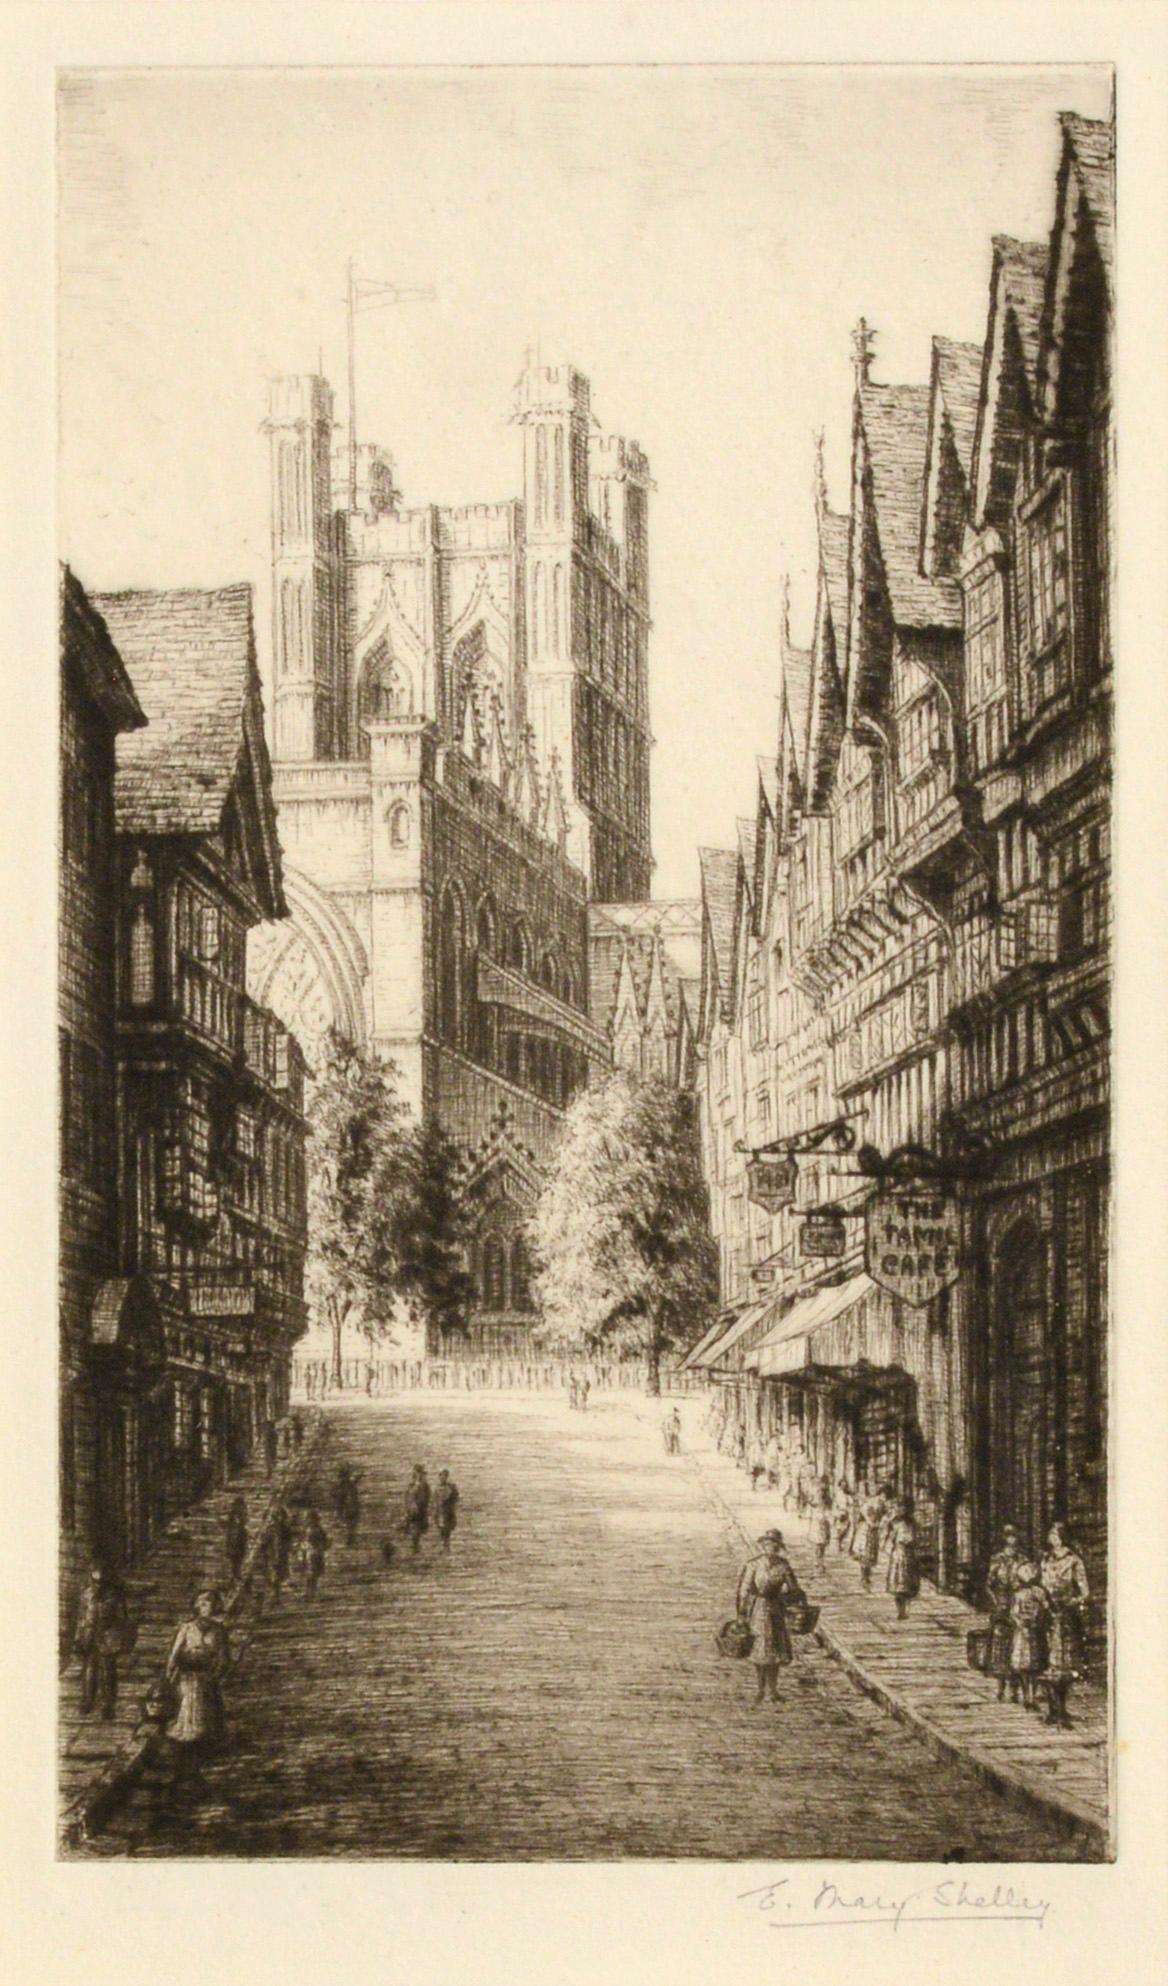 Early 20th Century British Street Scene - 1920s Figurative Landscape Etching - Print by E. Mary Shelley